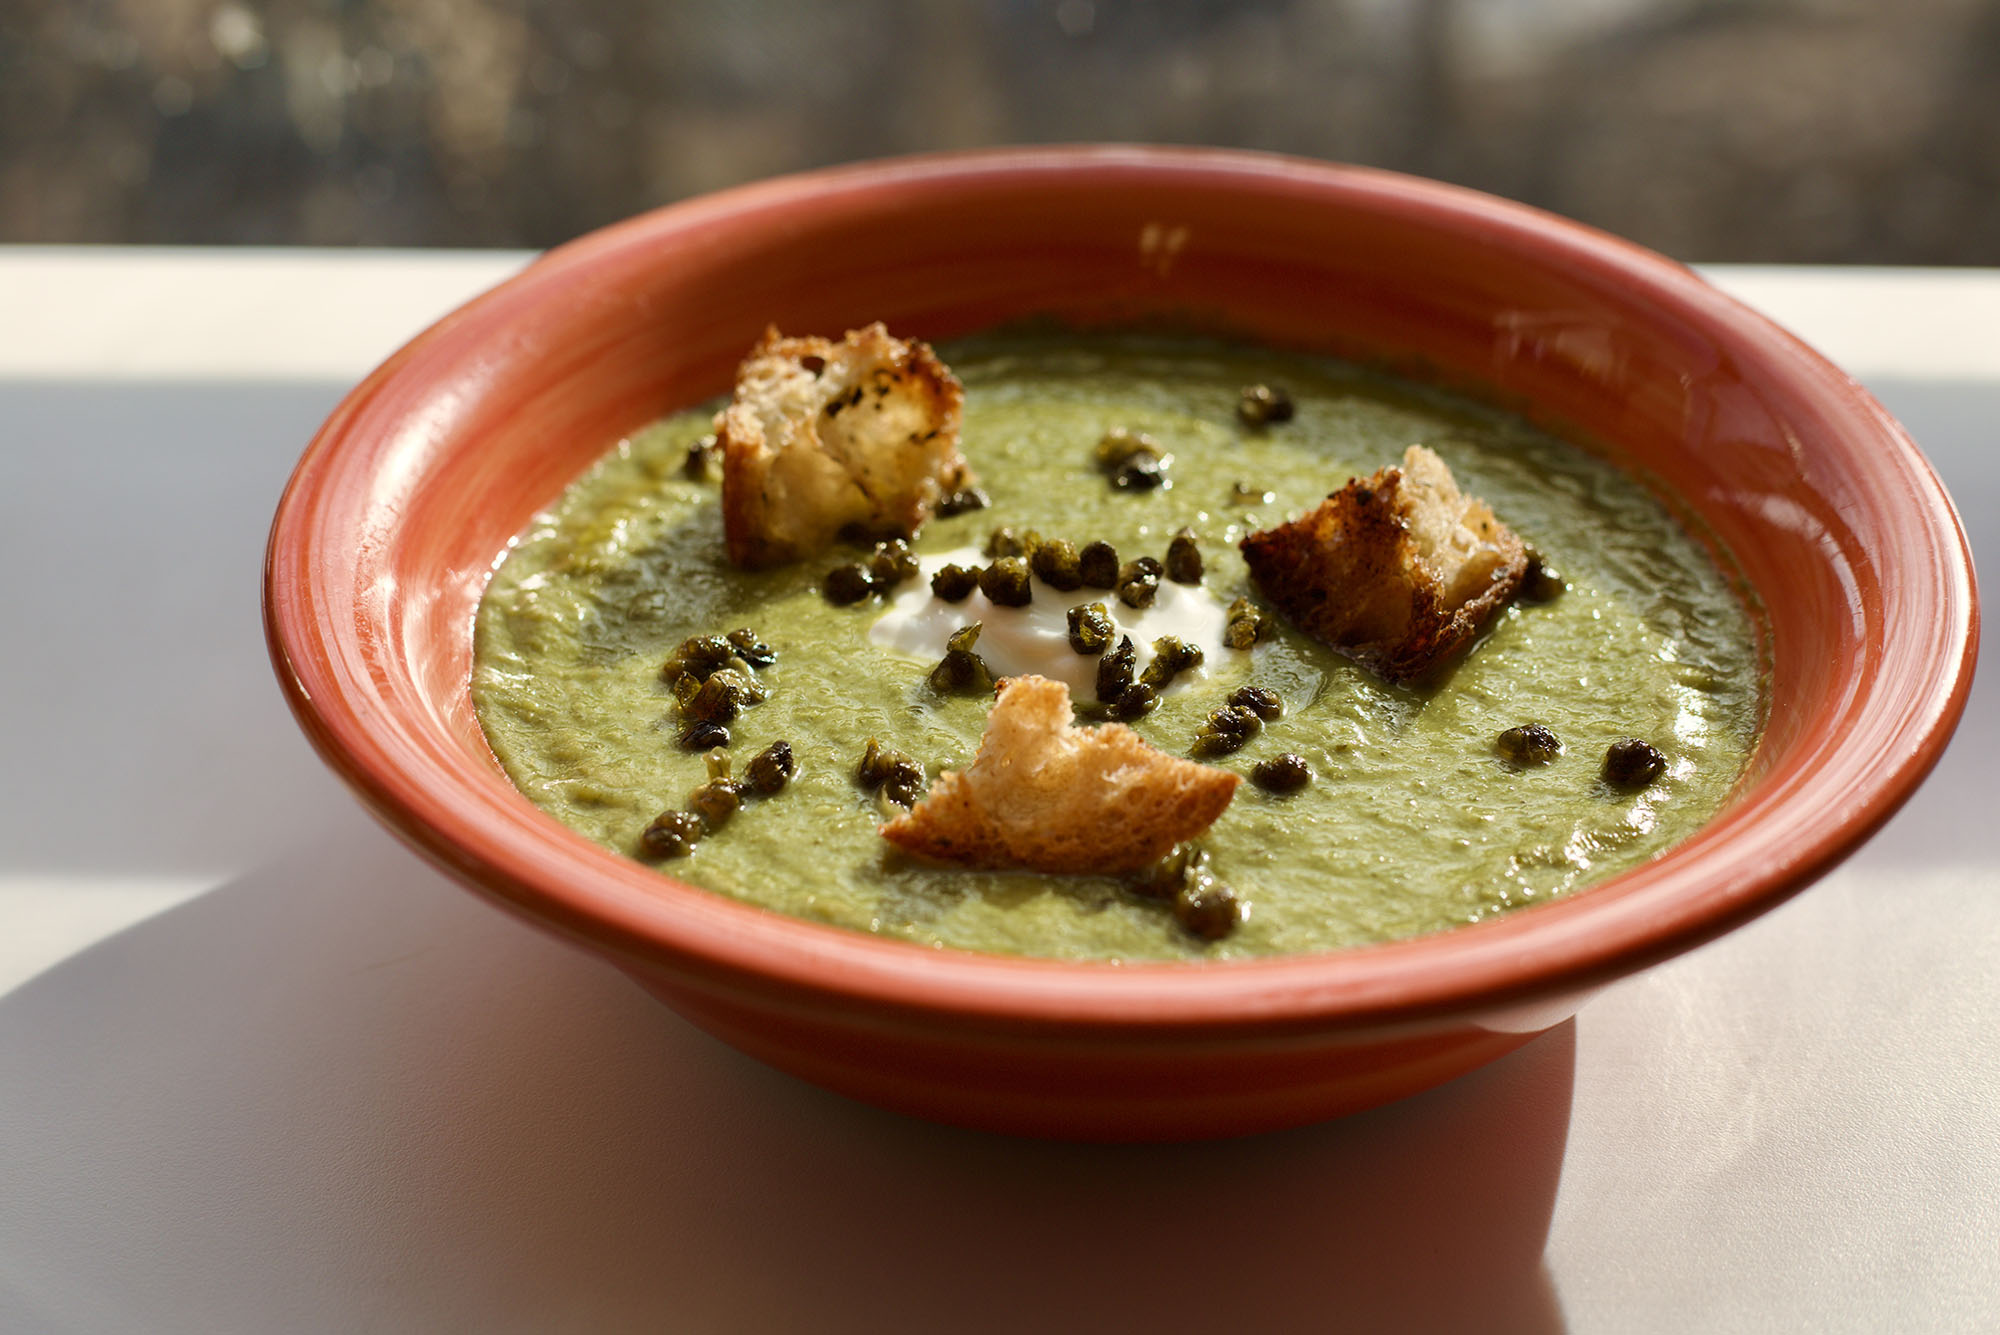 Photo: a red bowl sat next to a window letting in natural light is filled with a dark green soup and topped with homemade croutons, a dollop of cheese, and capers.